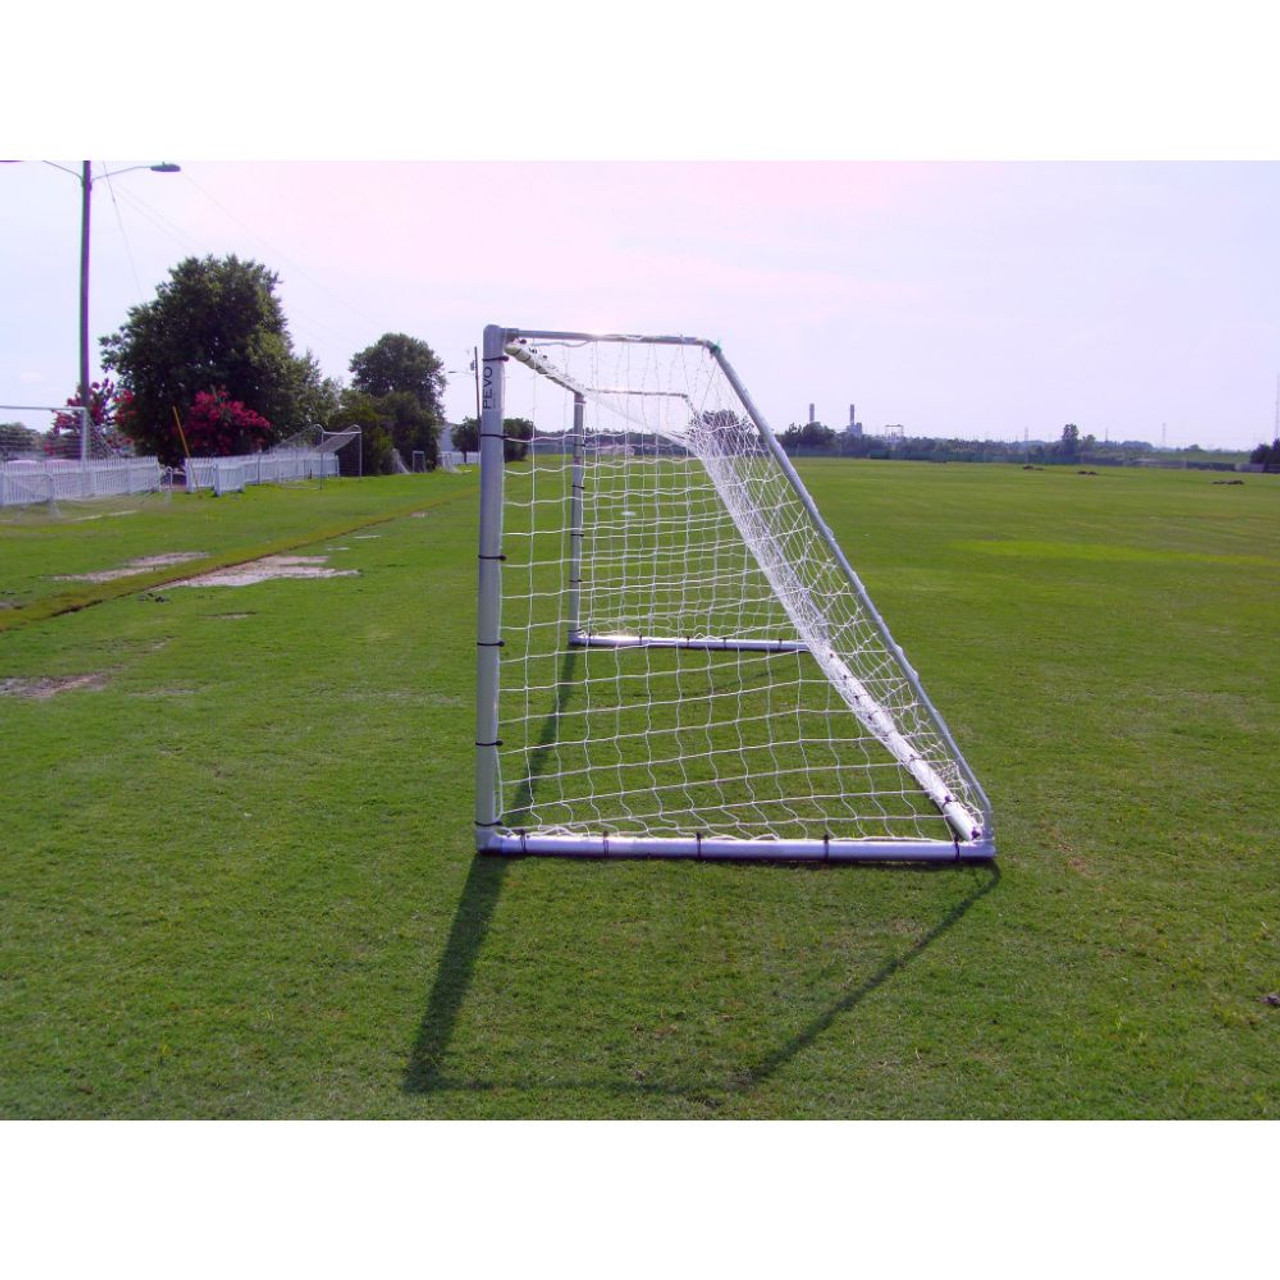 Economy Series Youth Soccer Goal - side